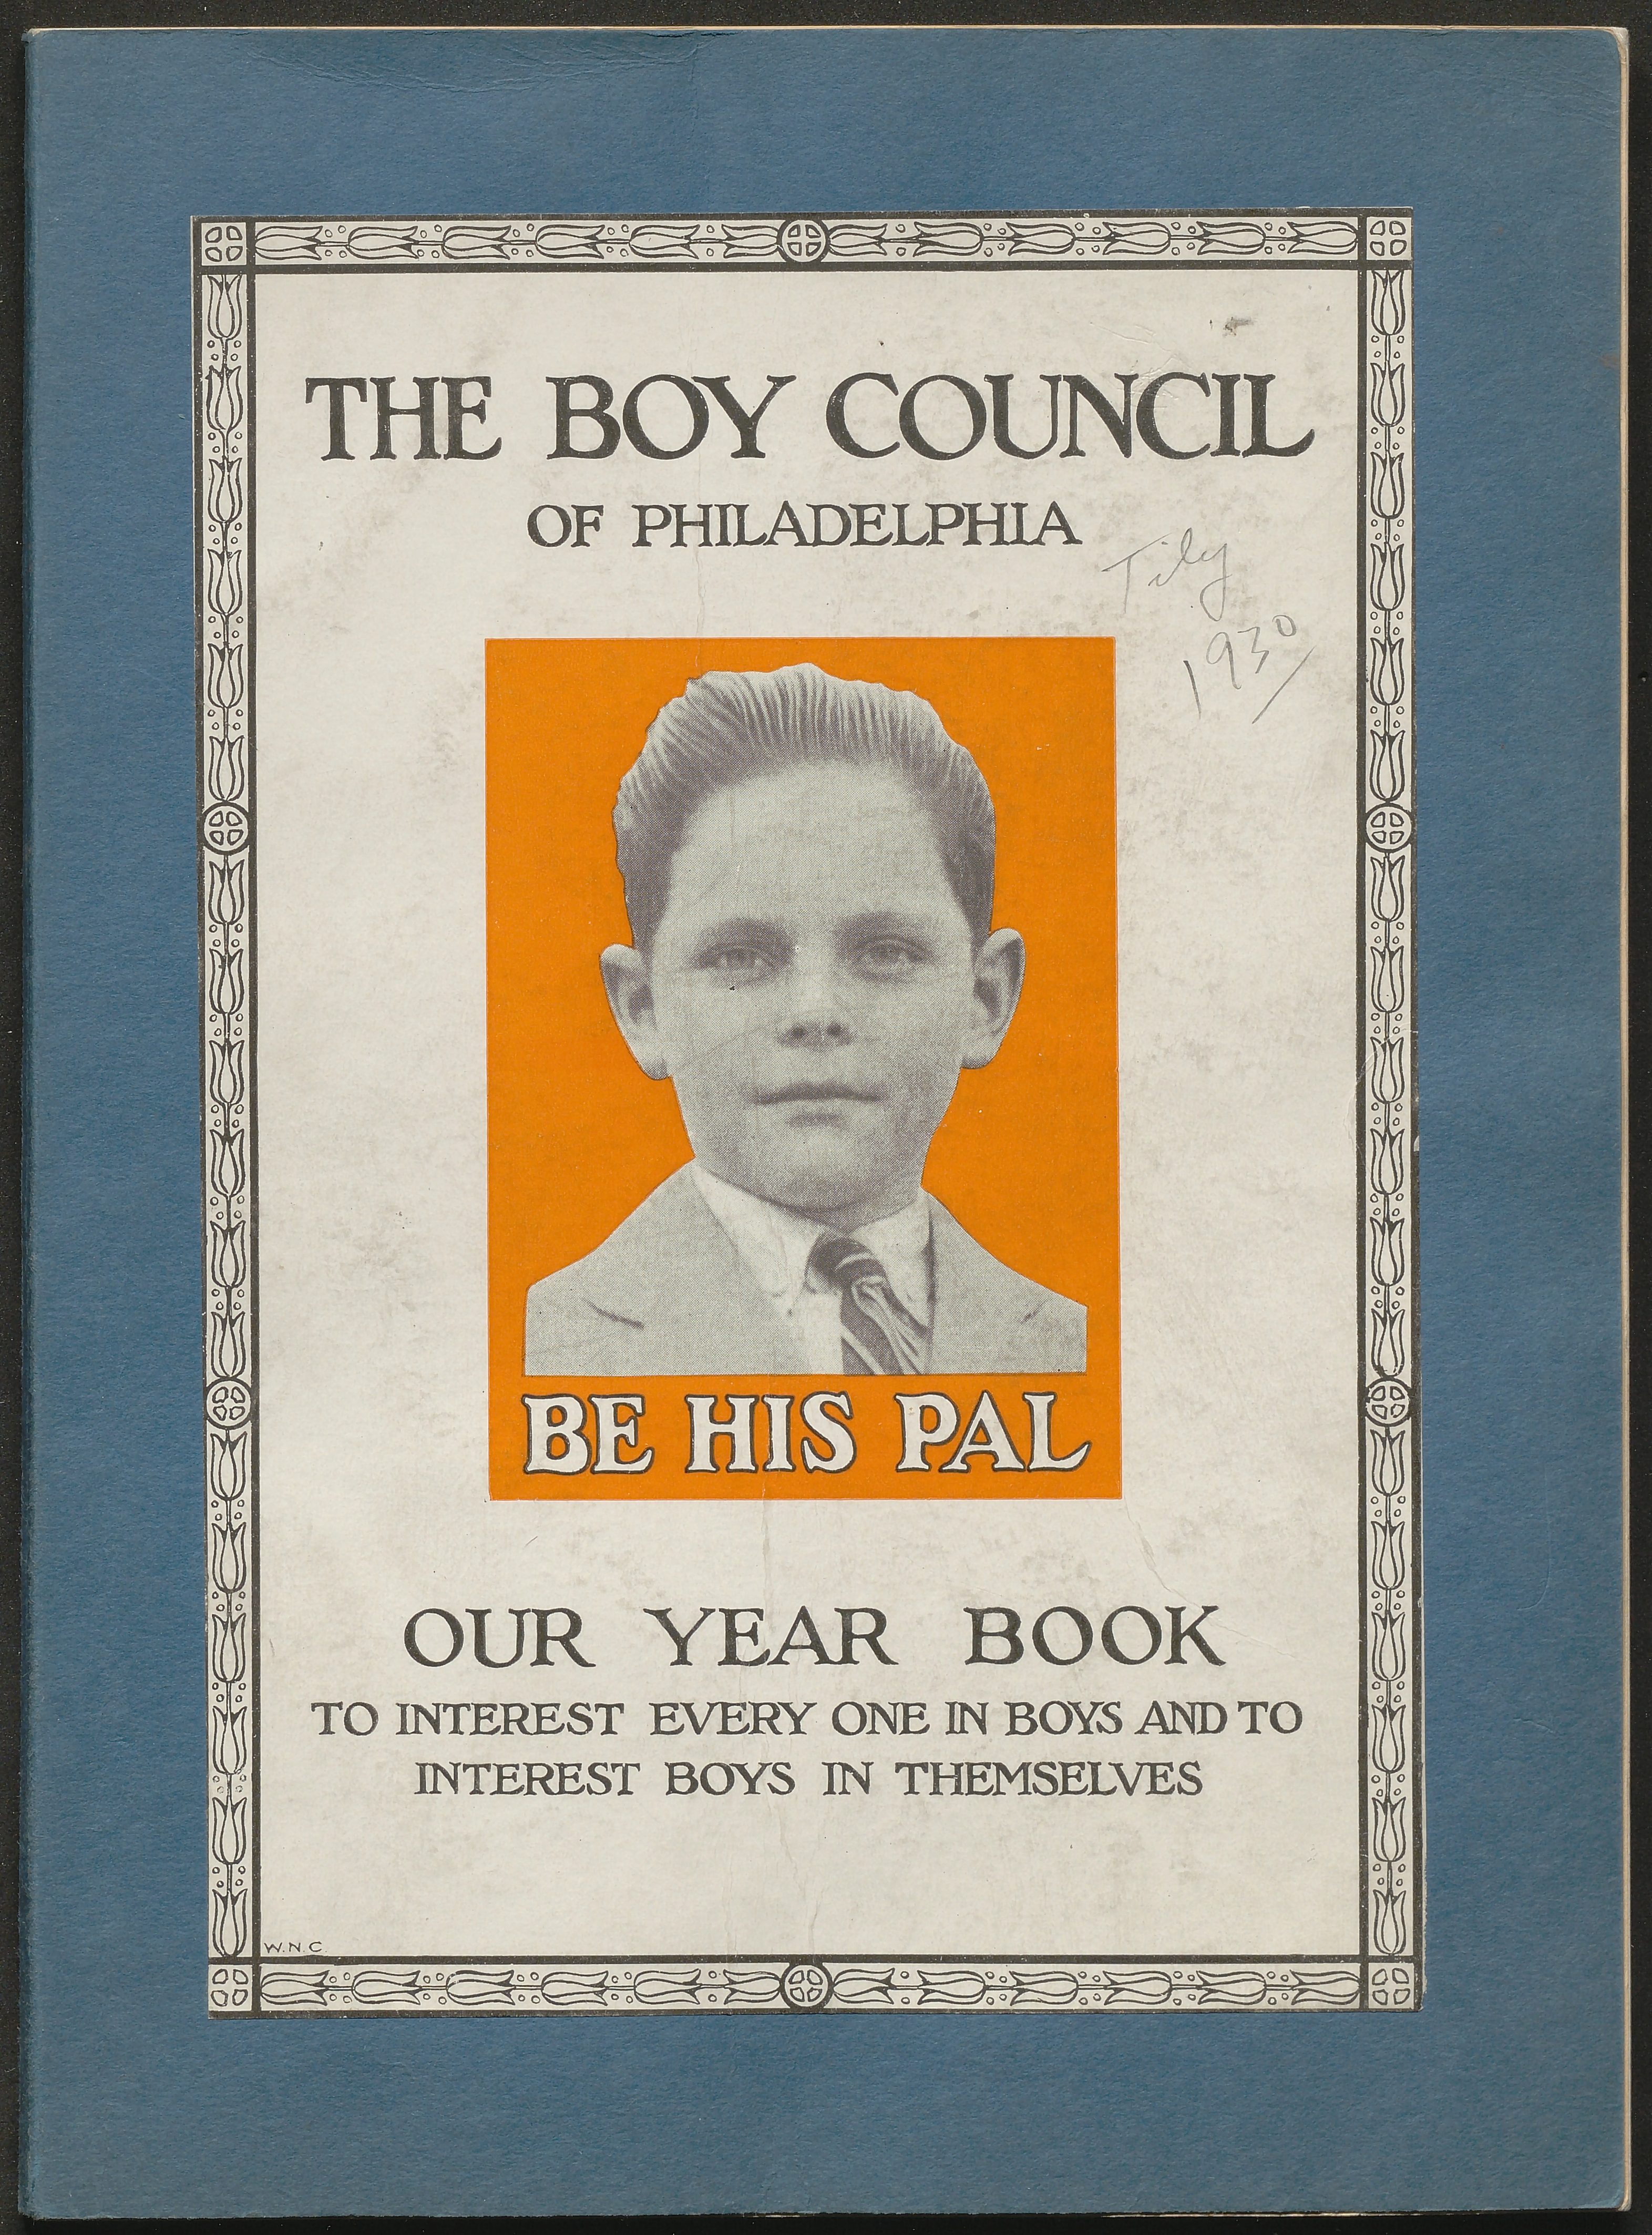 Cover of the 1930 yearbook for the Boy Council of Philadelphia.